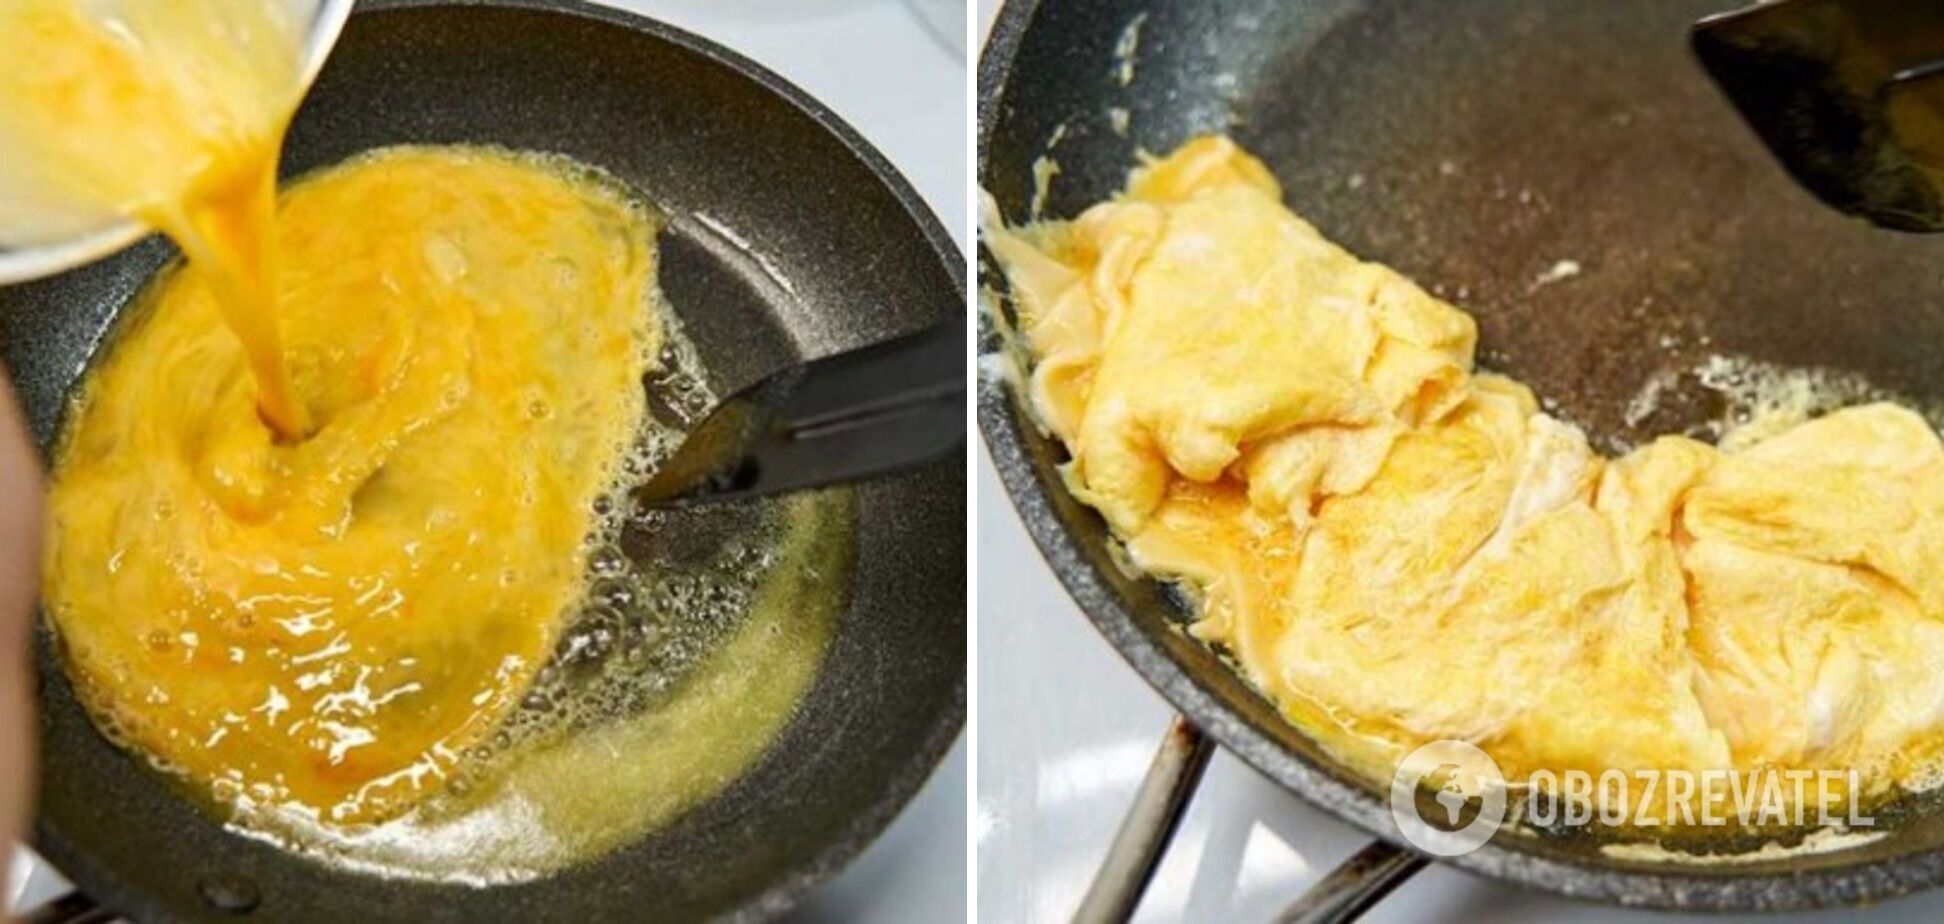 Cooking an omelet